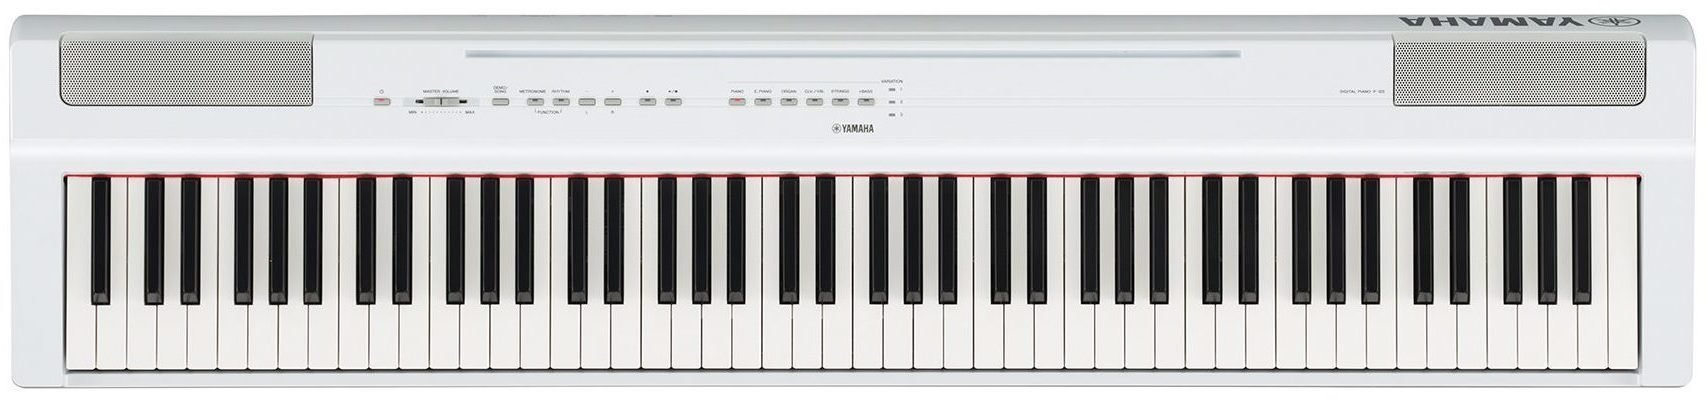 Digitaal stagepiano Yamaha P-125 WH Digitaal stagepiano